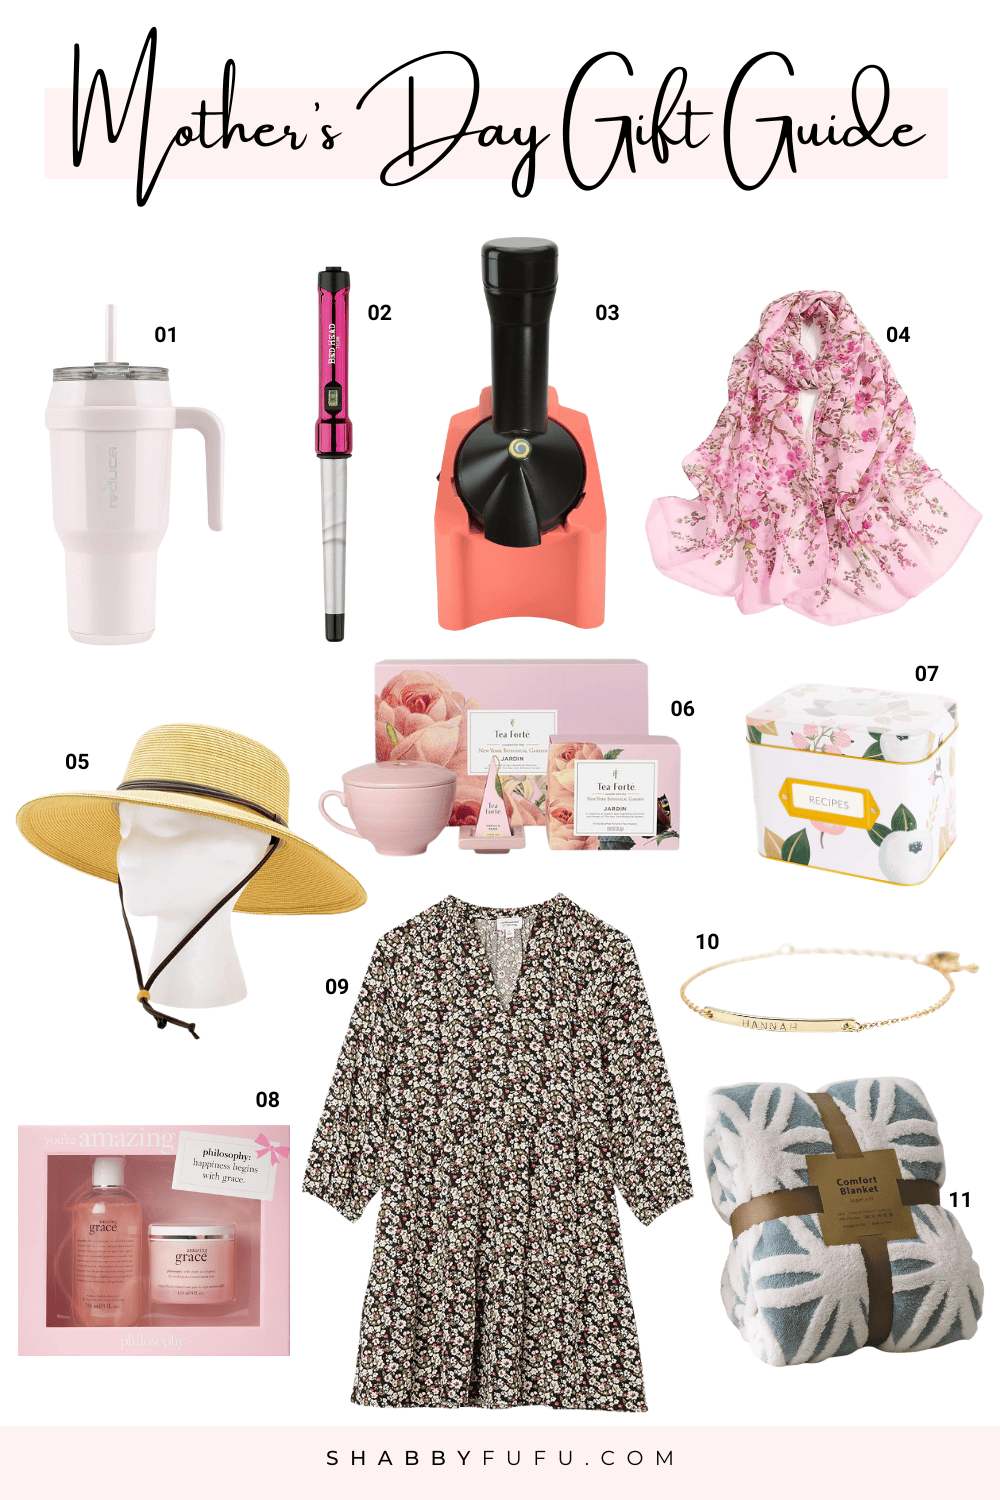 Mother's Day Gift Guide collage image featuring Amazon products